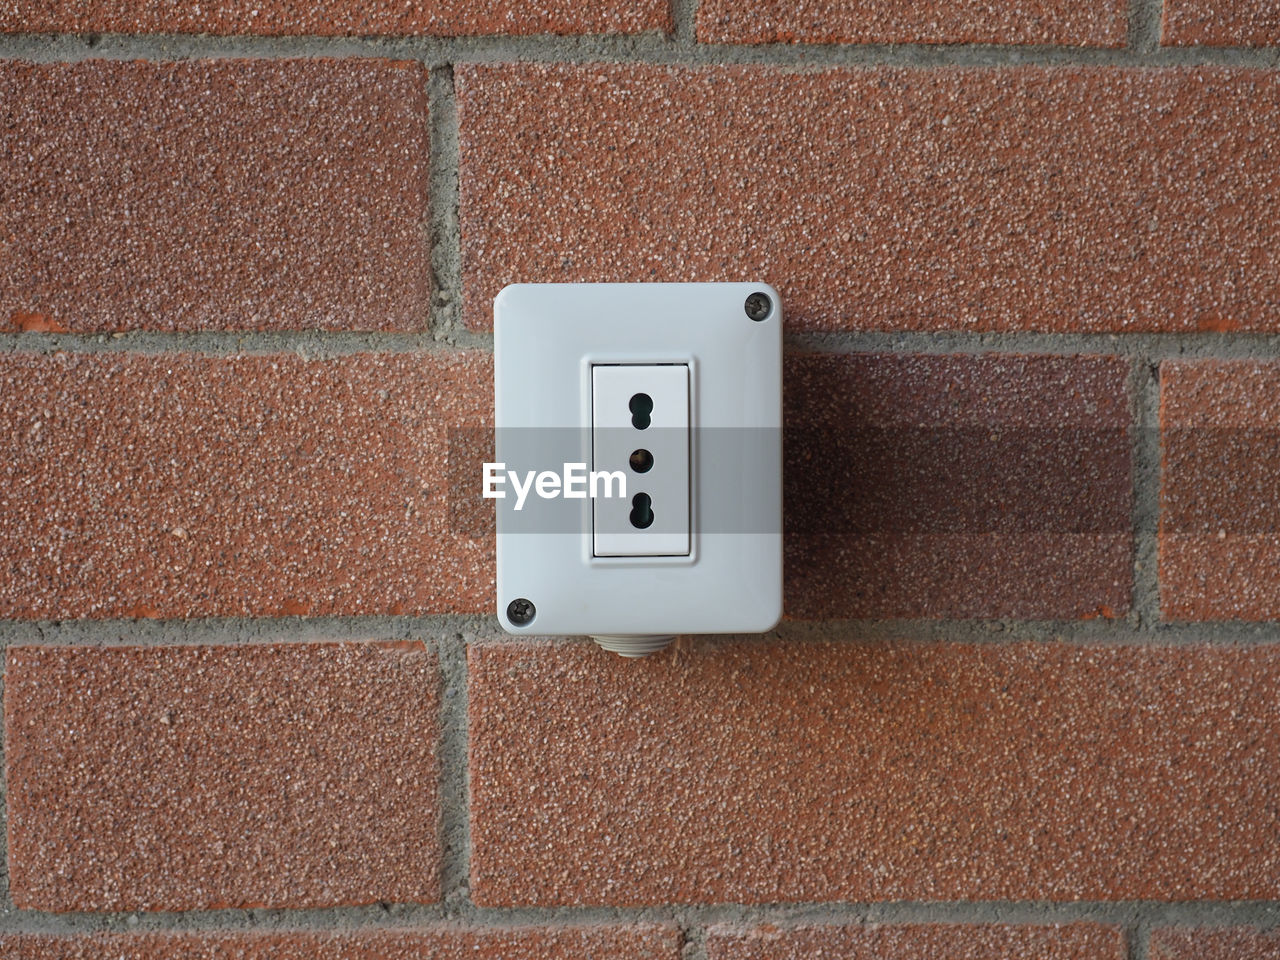 wall - building feature, wall, electricity, power plugs and sockets, no people, brick, floor, flooring, built structure, technology, architecture, tile, brick wall, close-up, textured, power supply, day, light switch